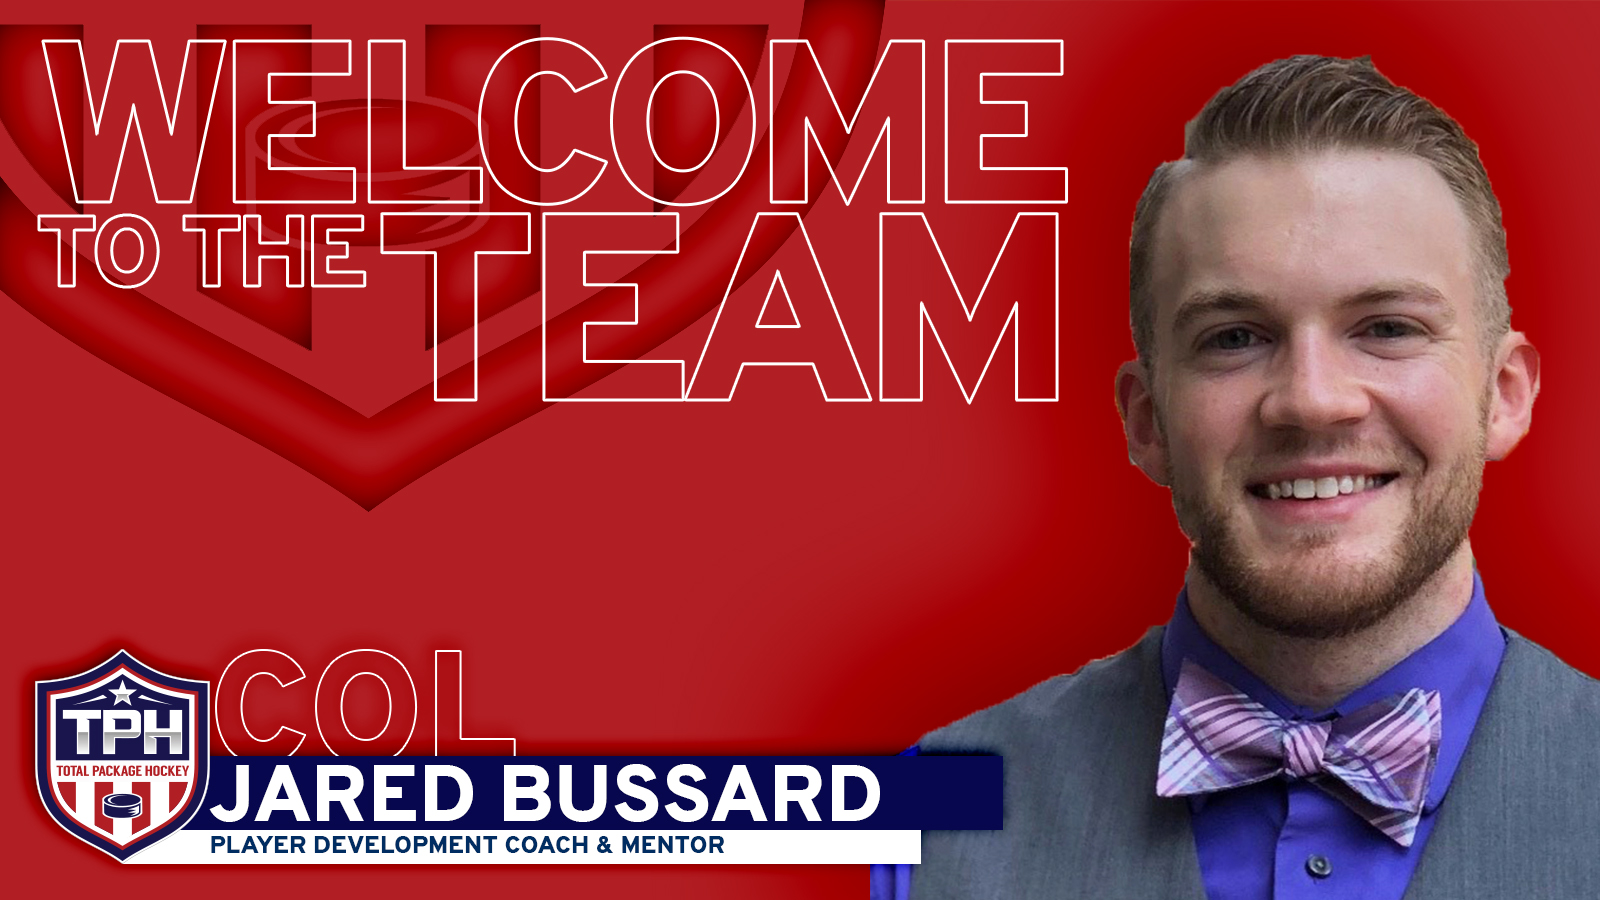 Welcome to the Team - Brussard